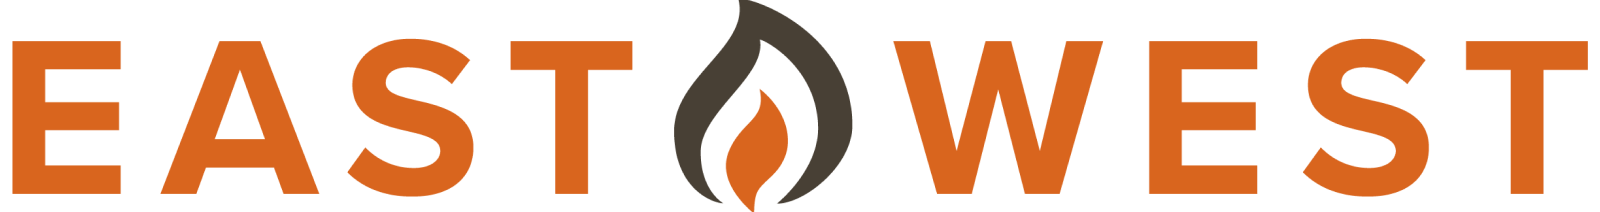 East-West logo: Orange text reading 'East West' with an orange and gray flame between the words.